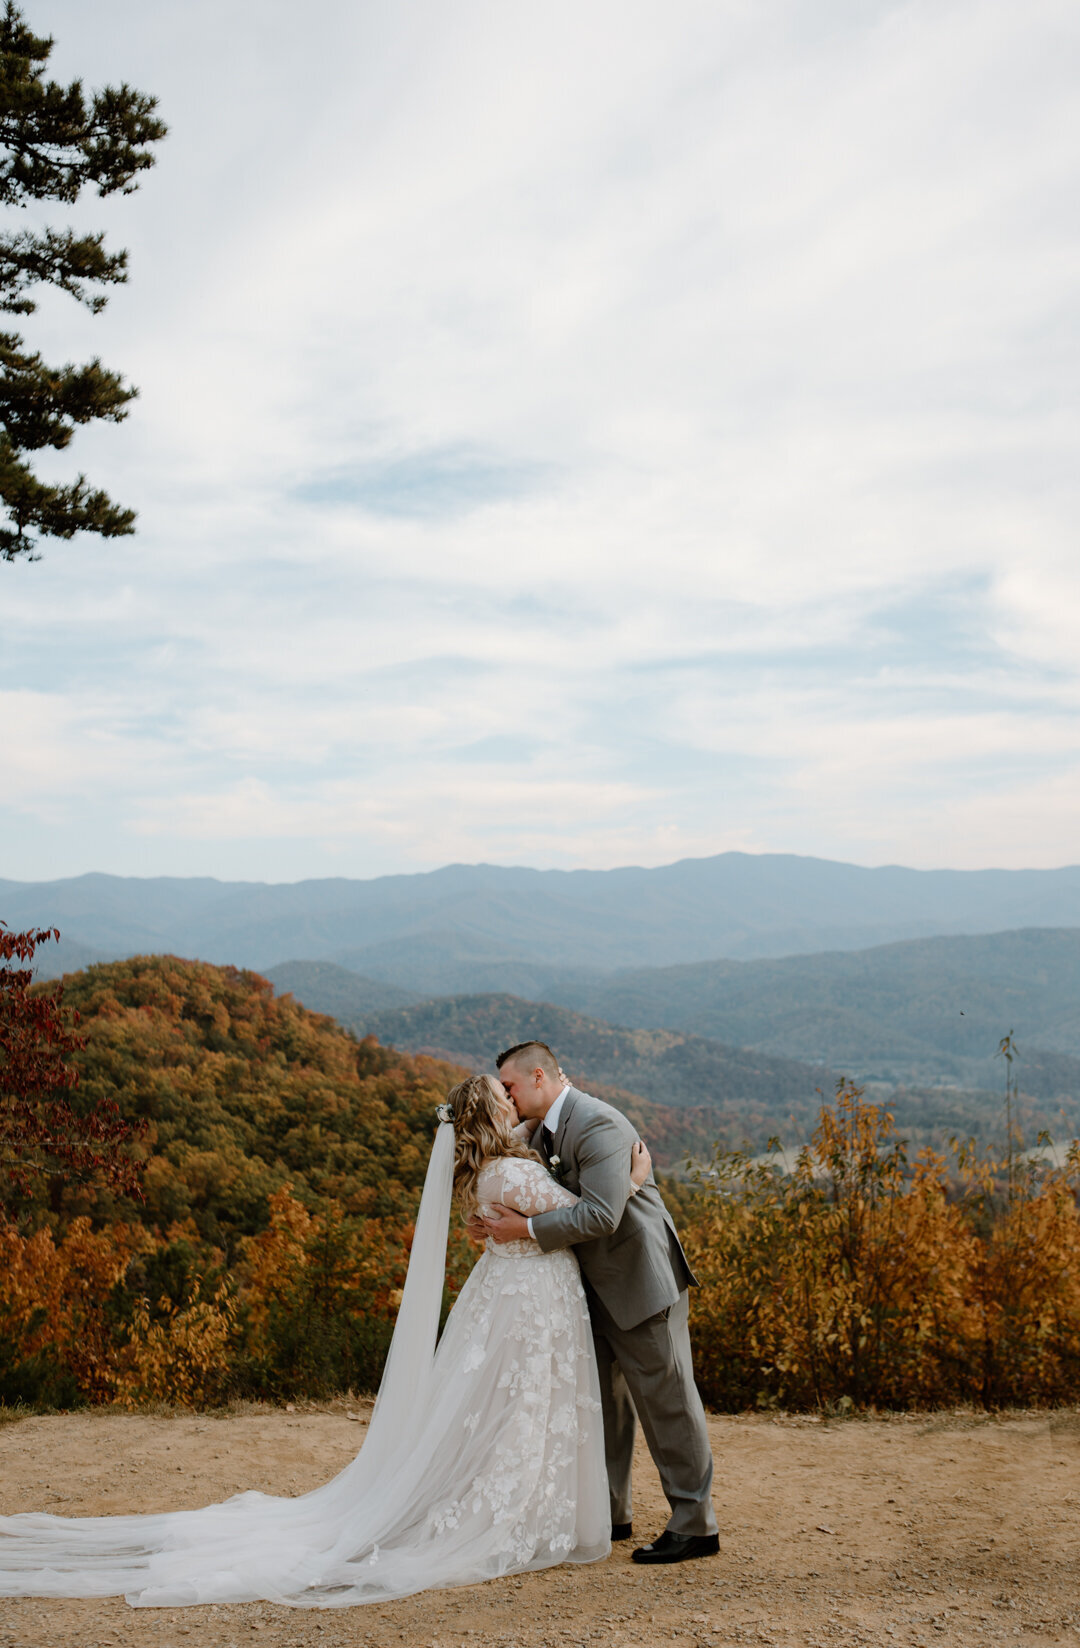 Bride and groom first kiss at their mountain overlook elopement.